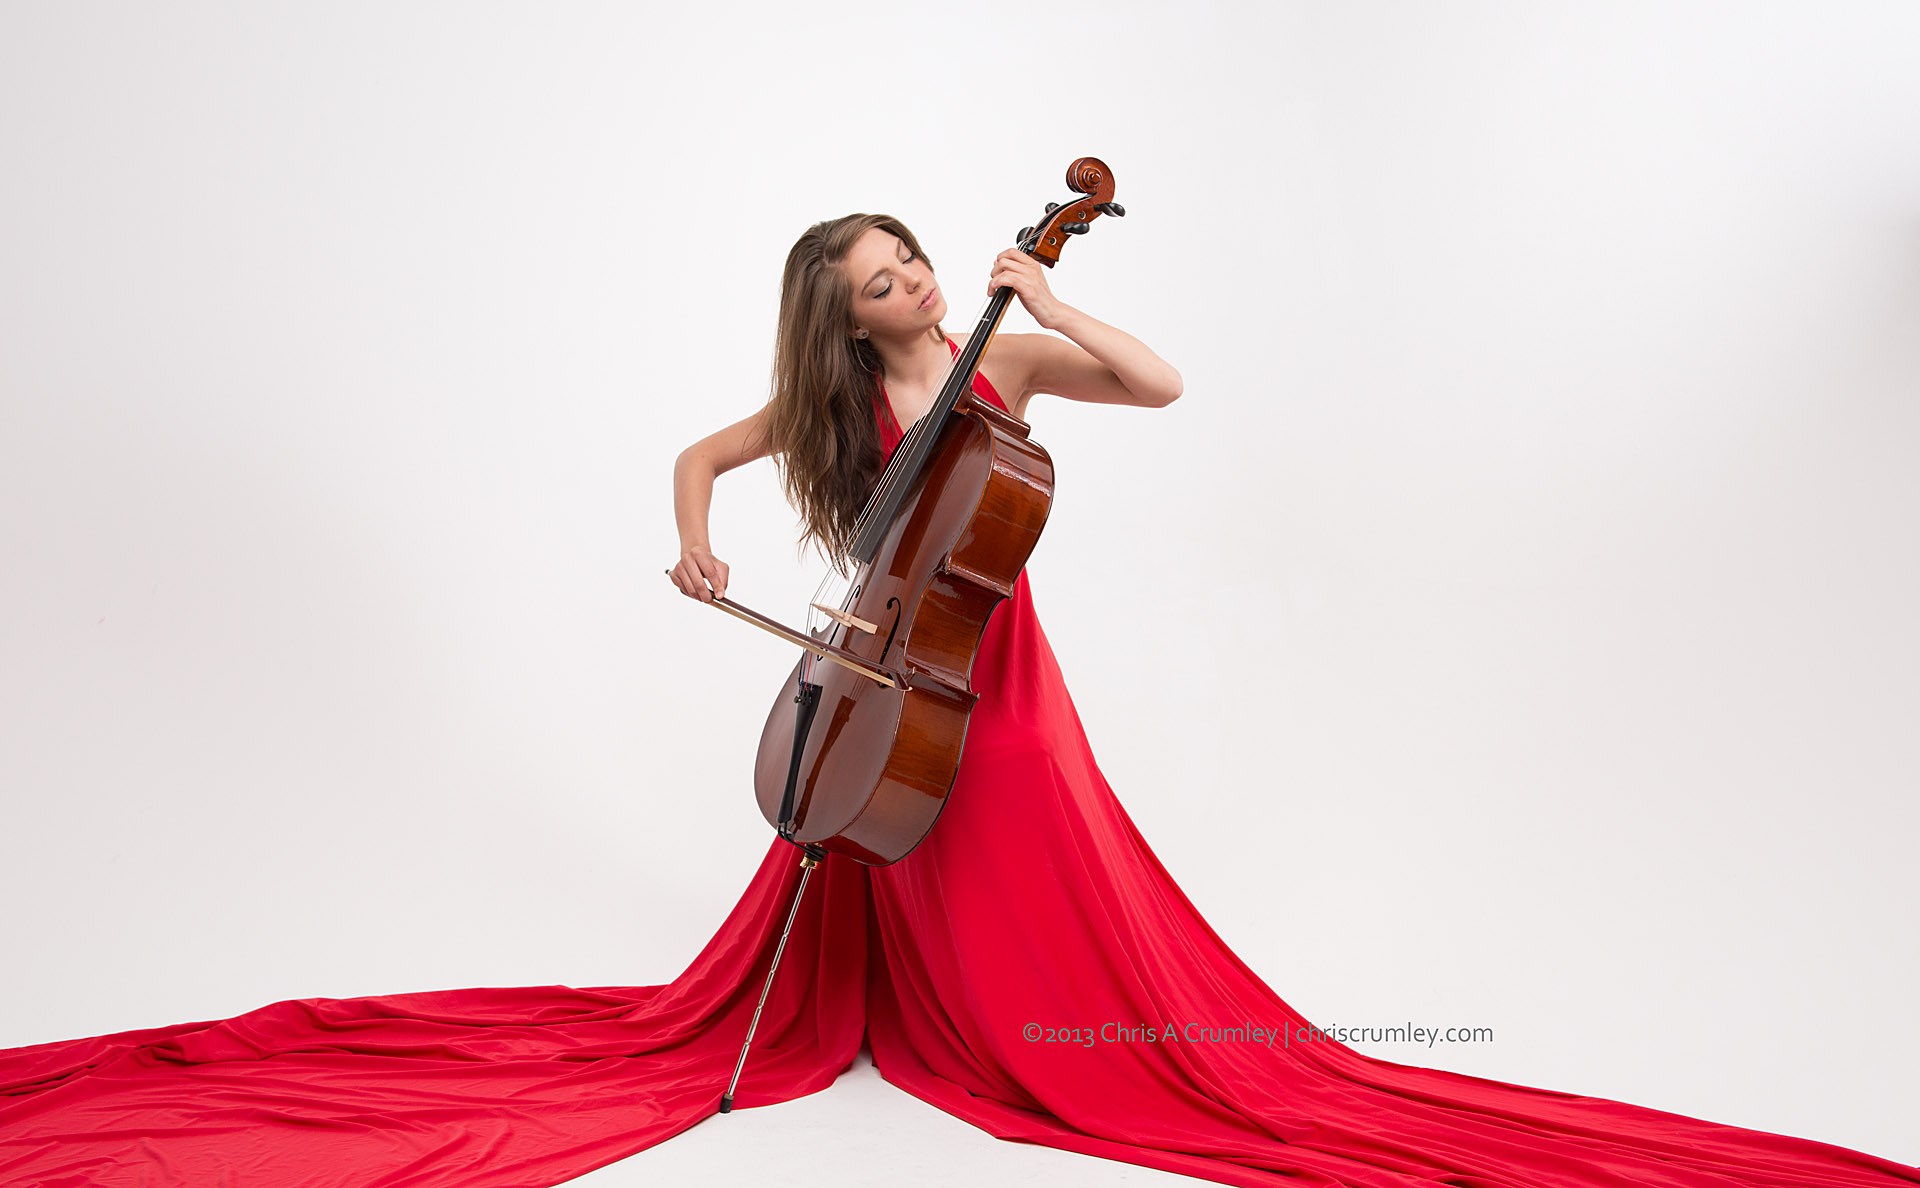 Cello and the Red Dress